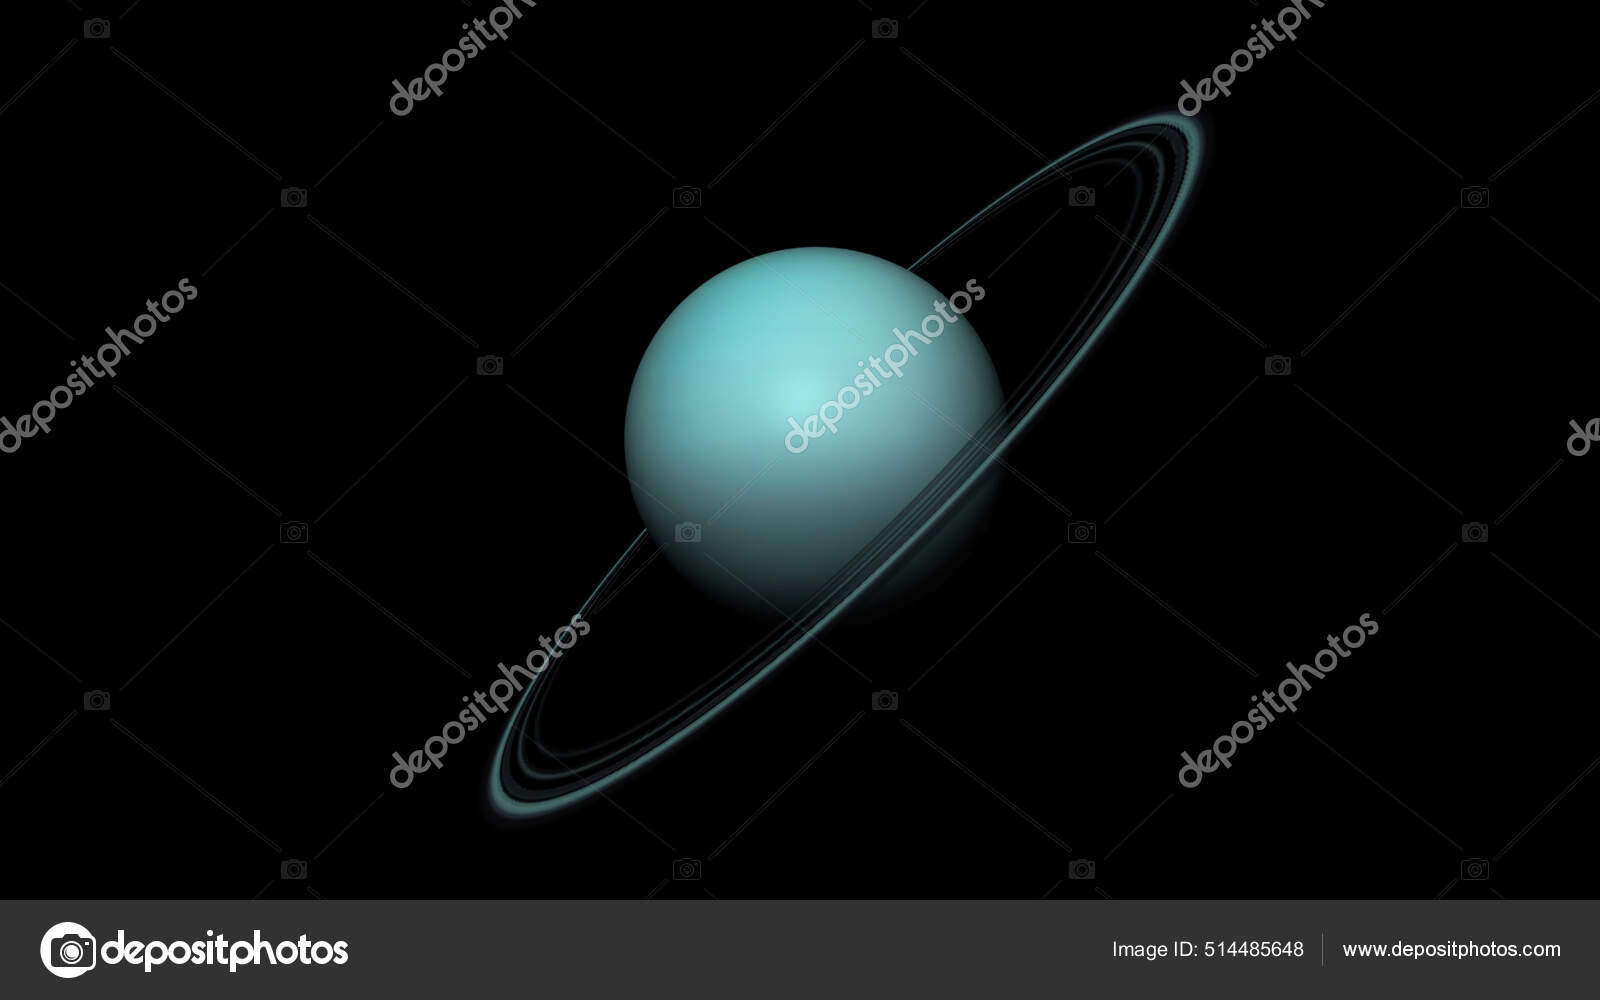 We're finally figuring out how Uranus ended up on its side